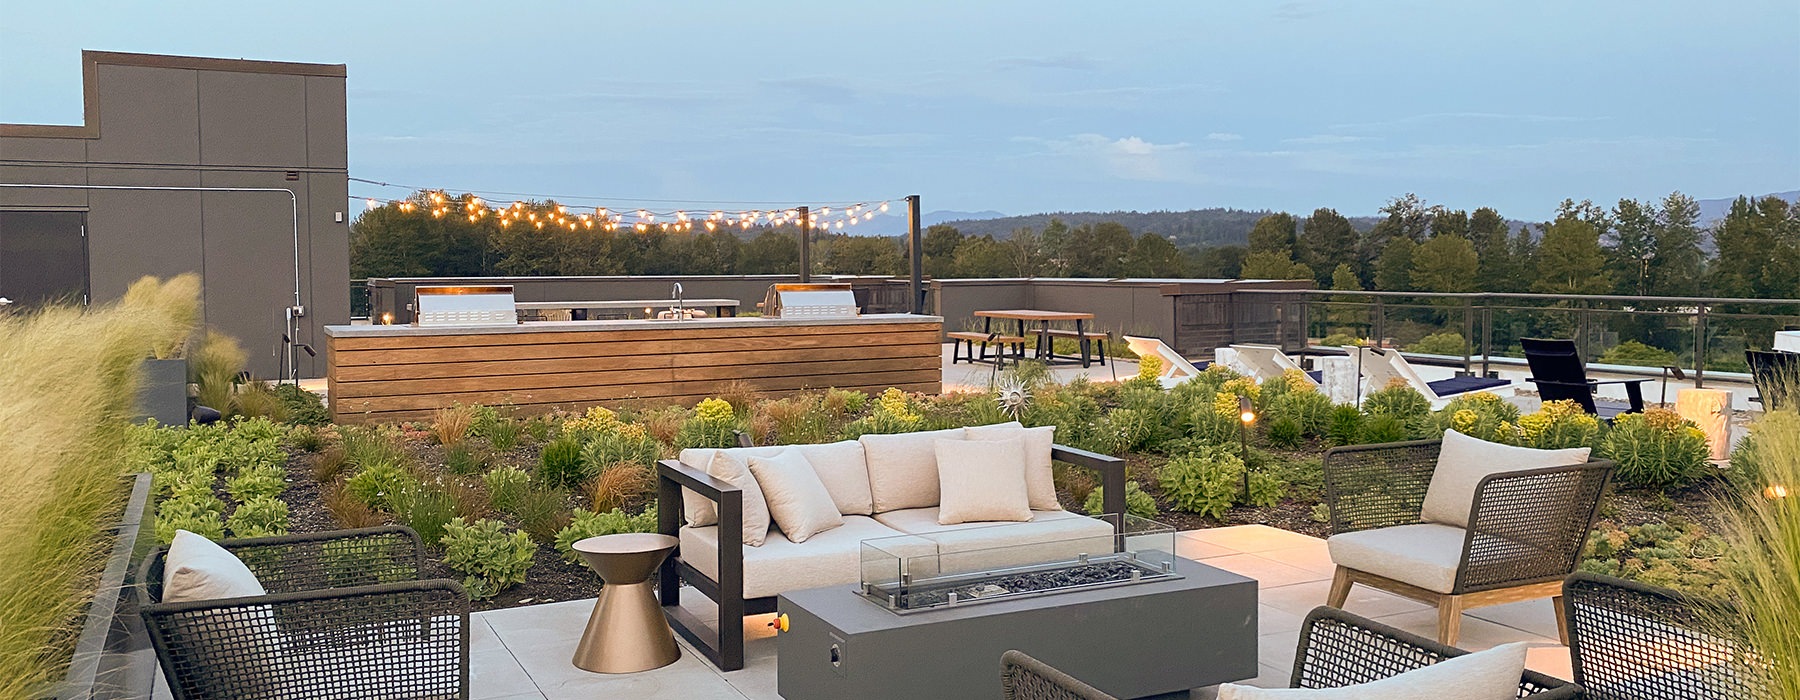 Rooftop Deck with Outdoor Kitchen